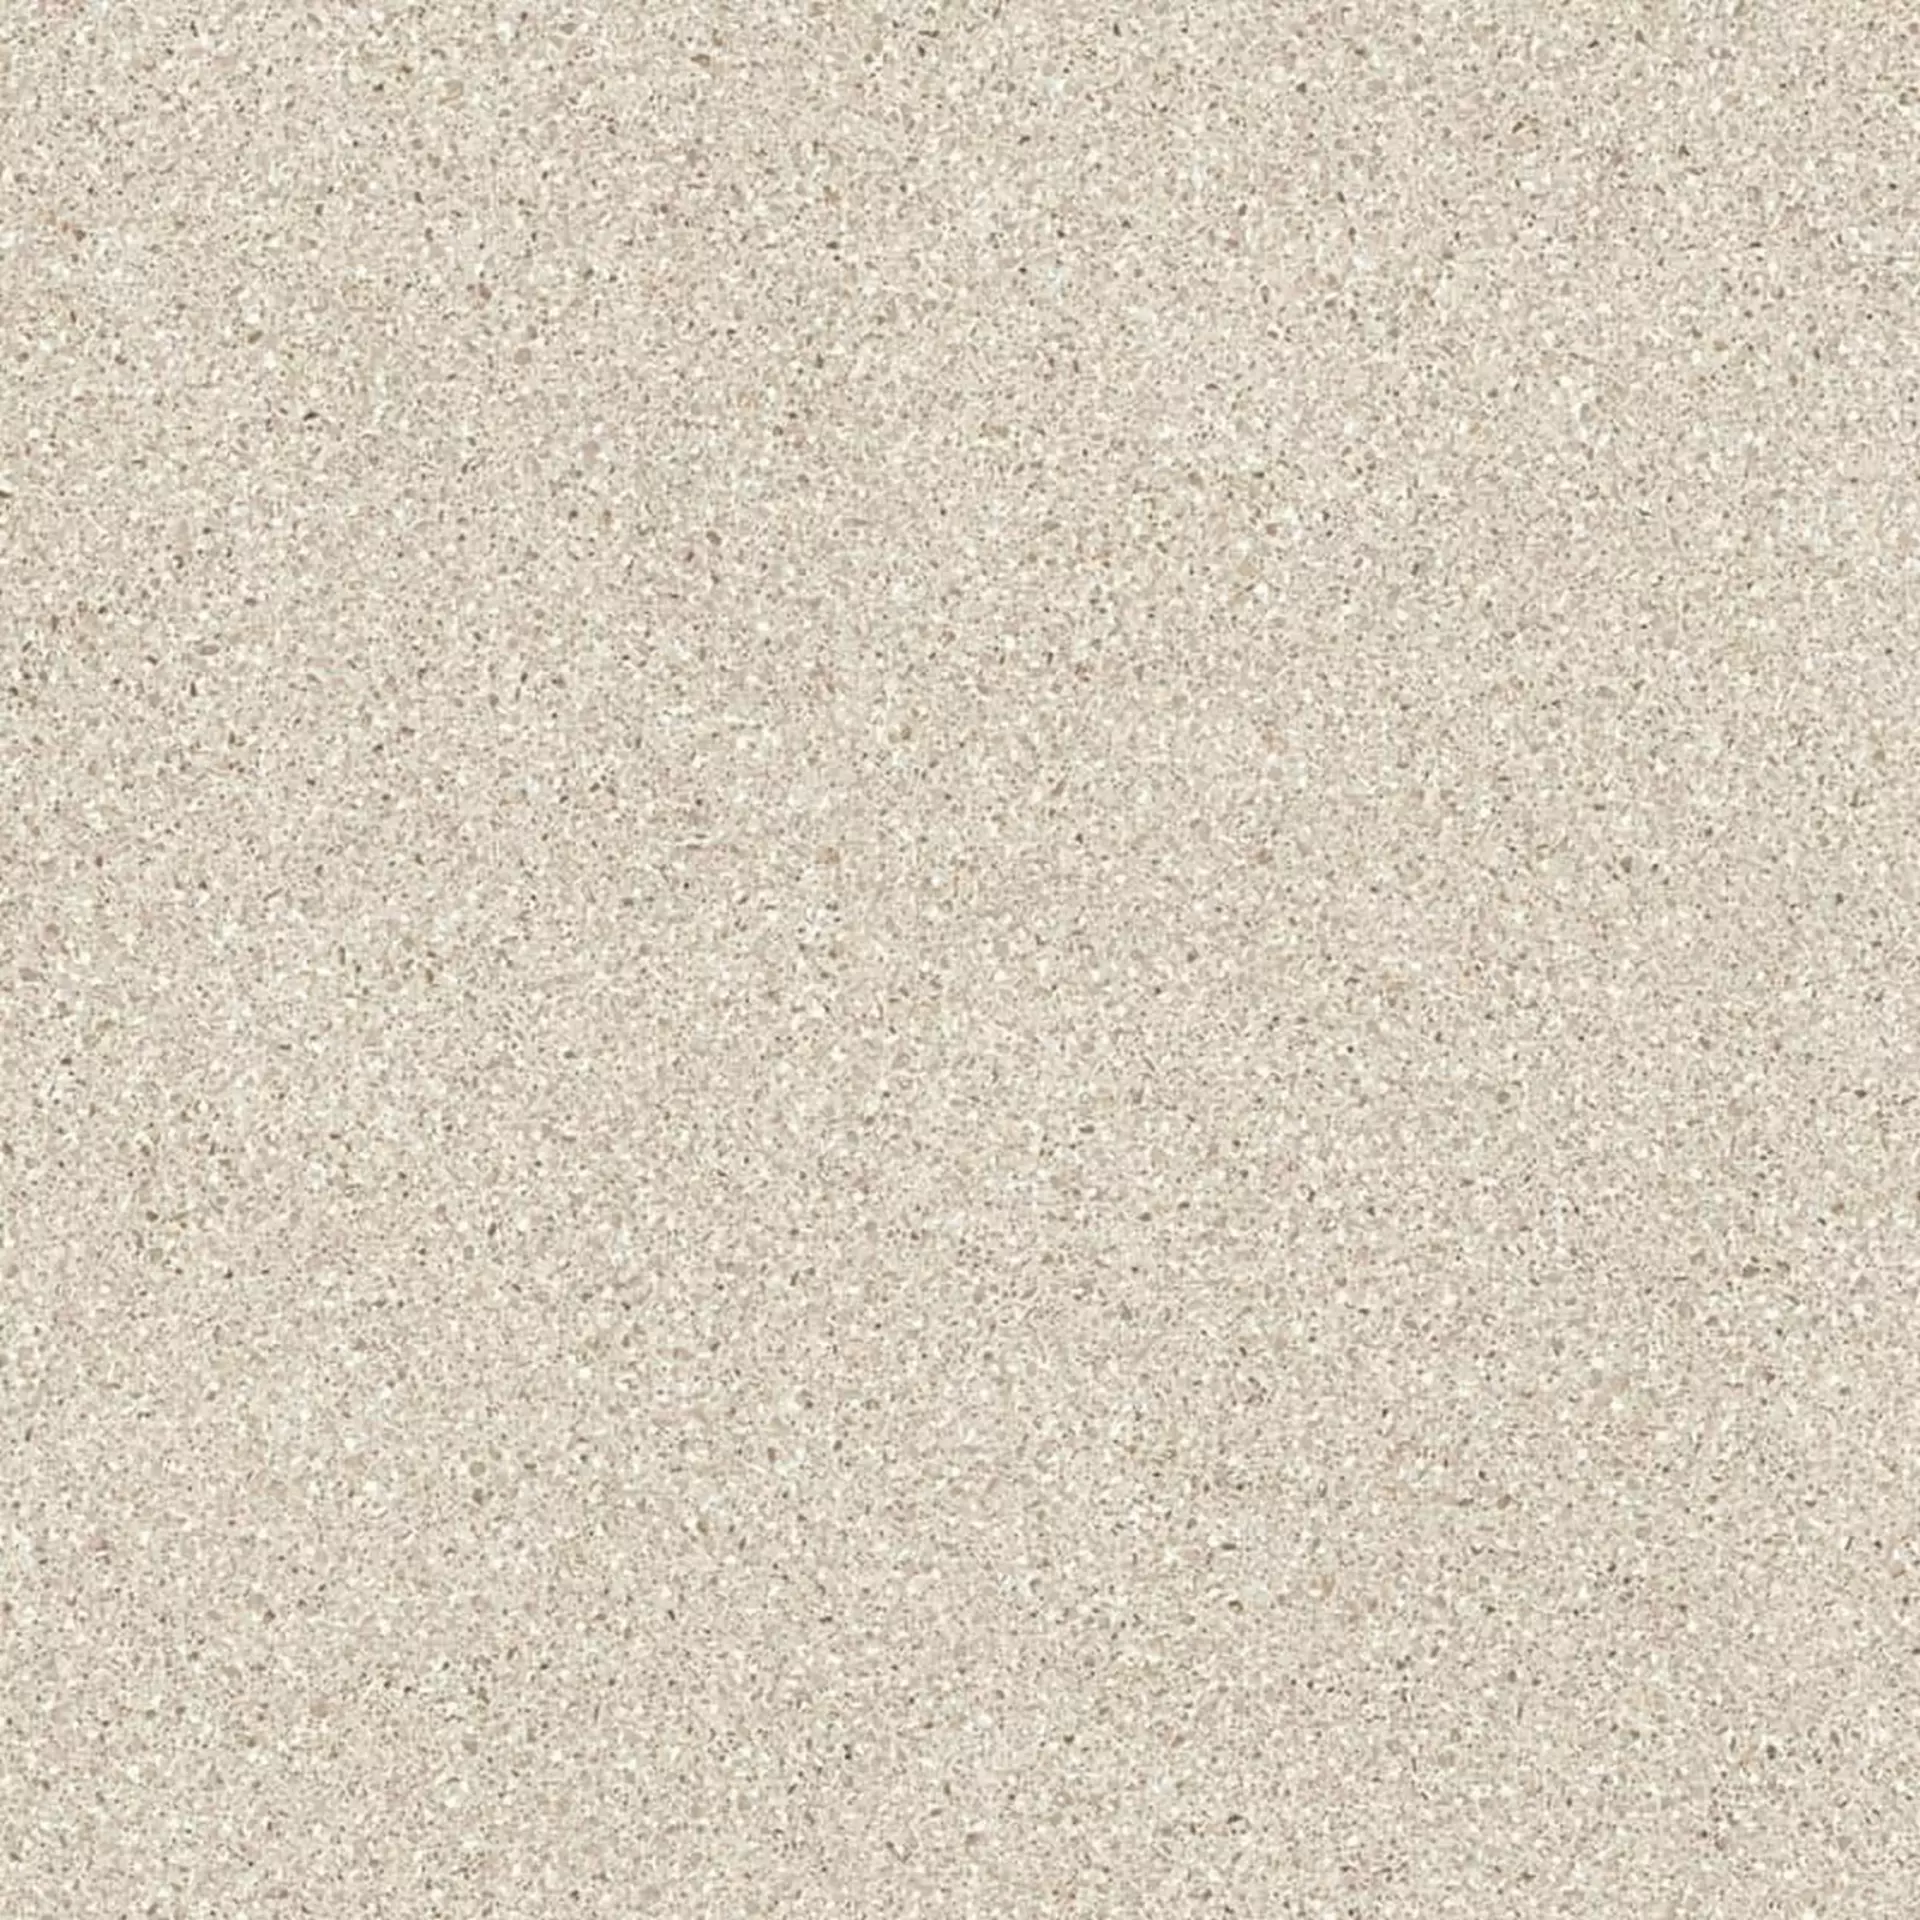 Sant Agostino Newdeco' Sand Natural CSANEDSN90 90x90cm rectified 10mm